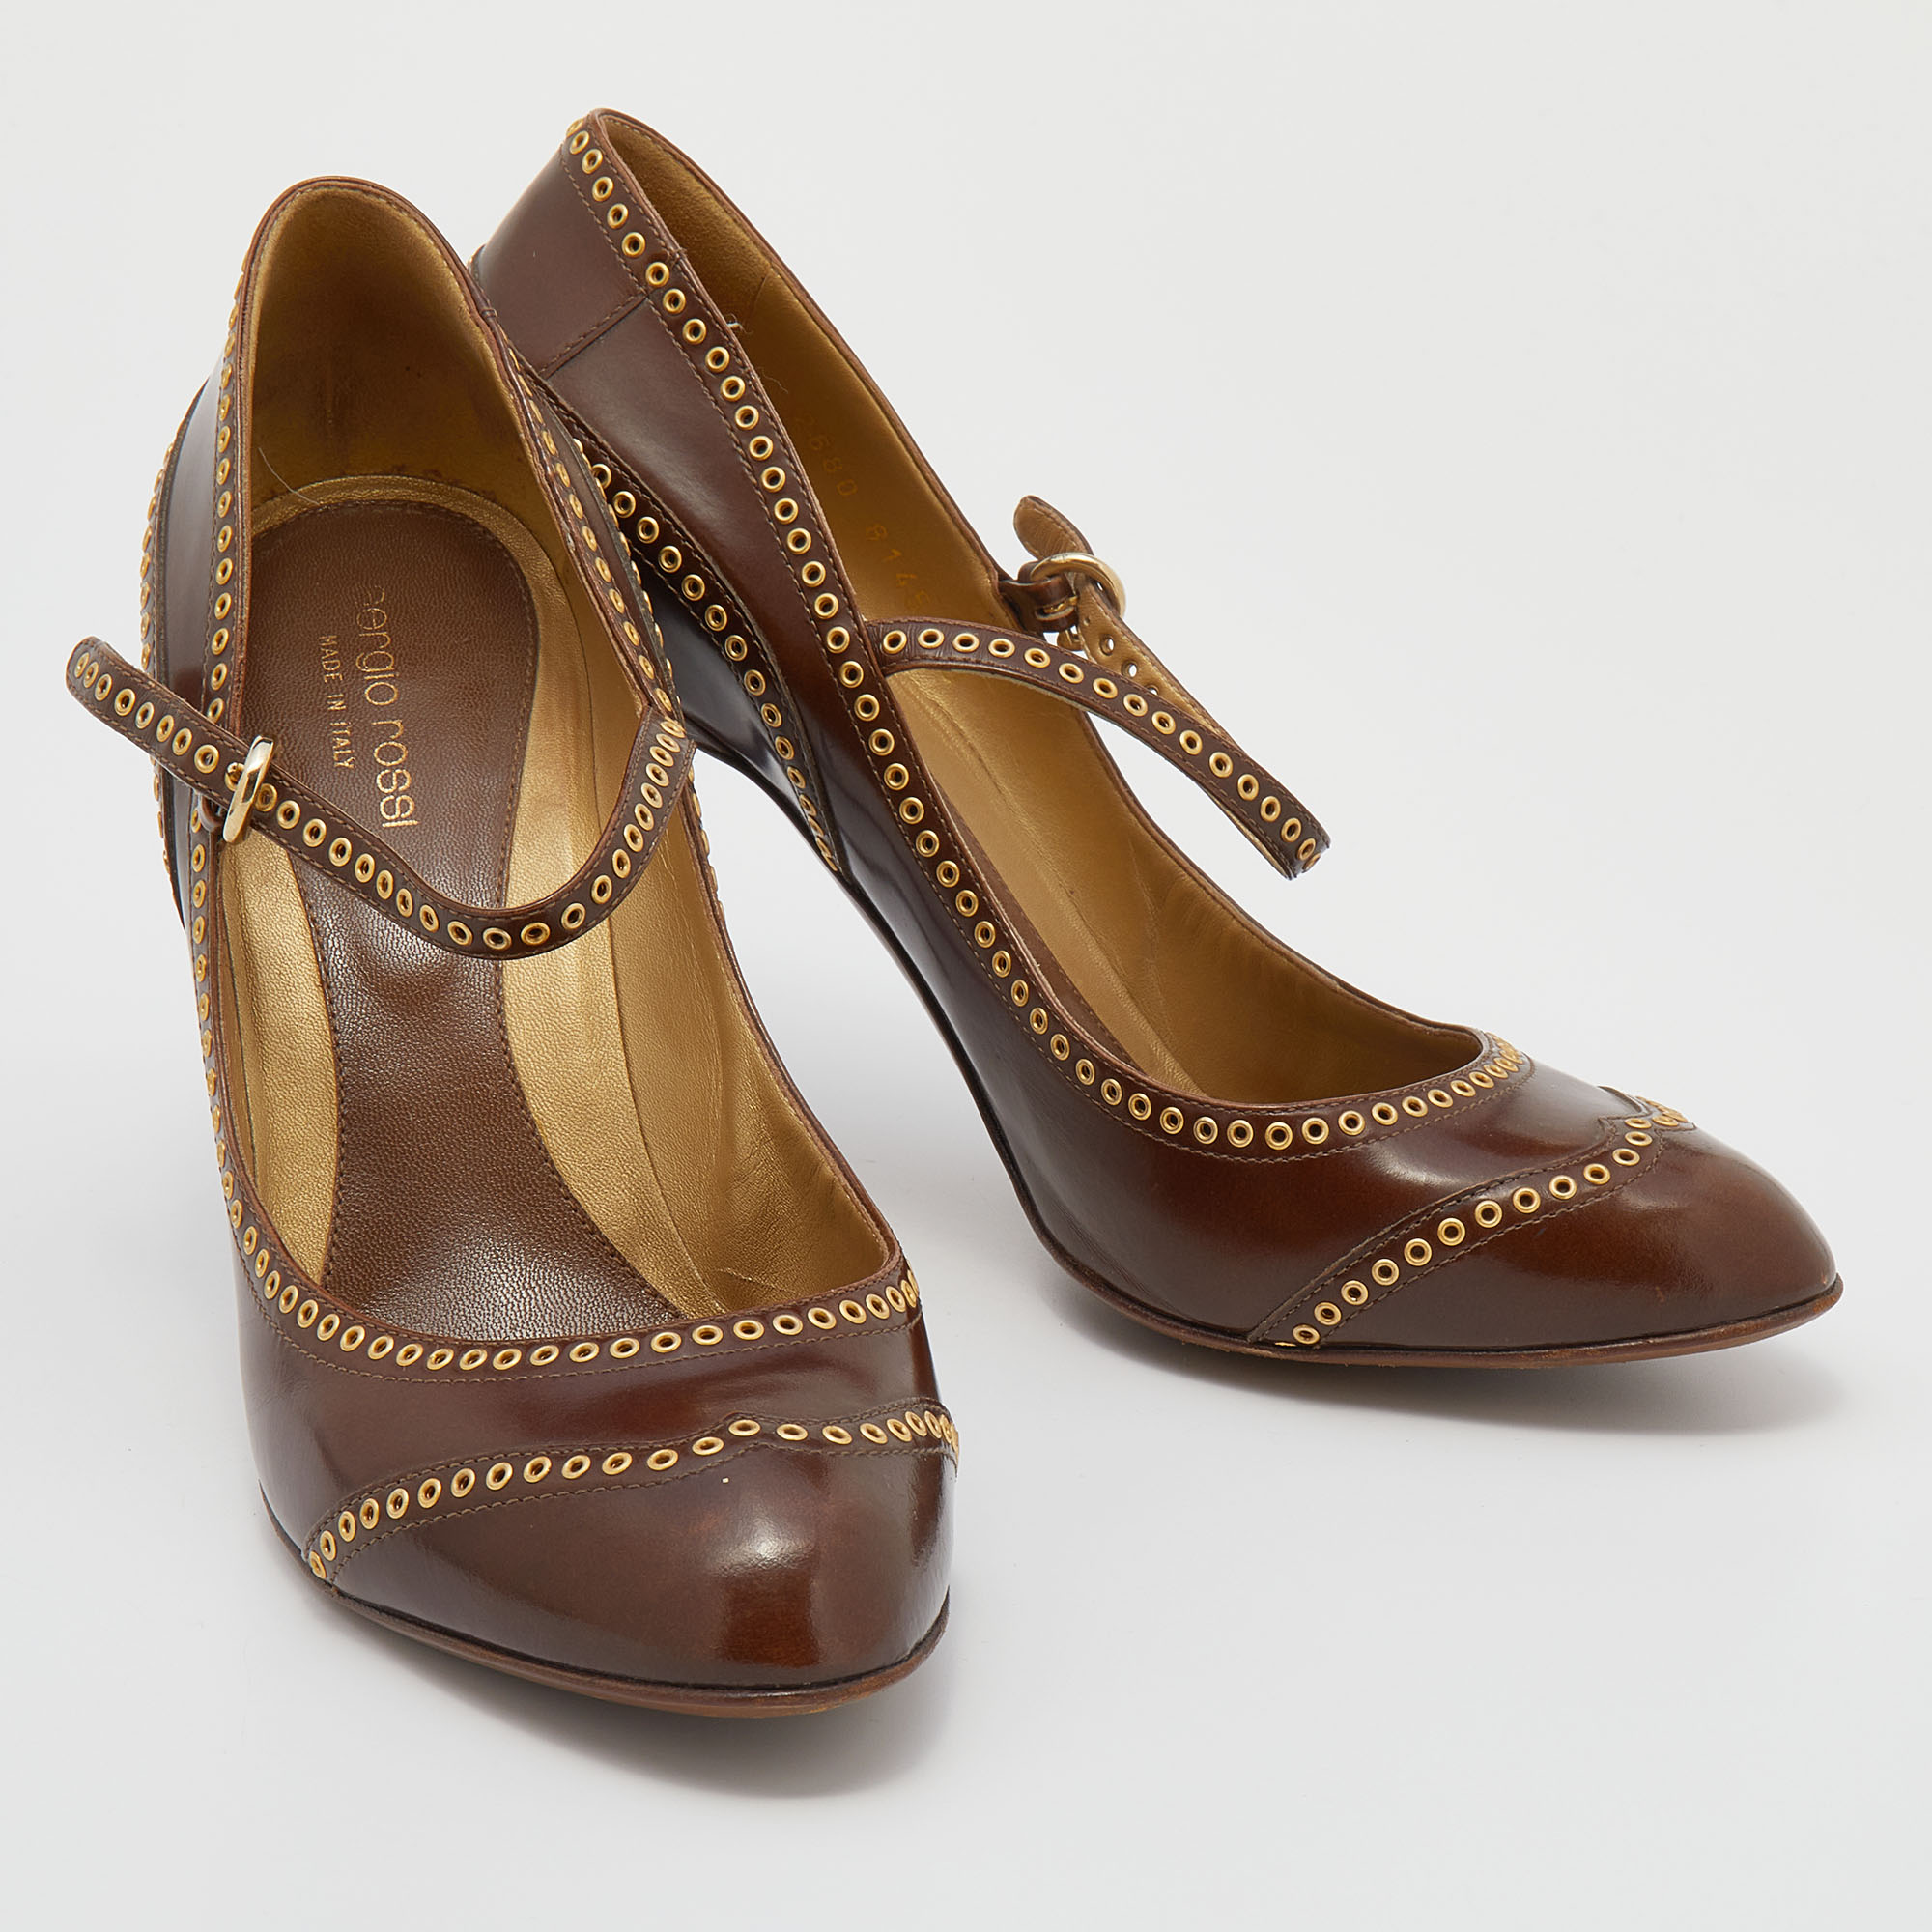 Sergio Rossi Brown Leather Eyelet Mary Jane Pumps Size 40